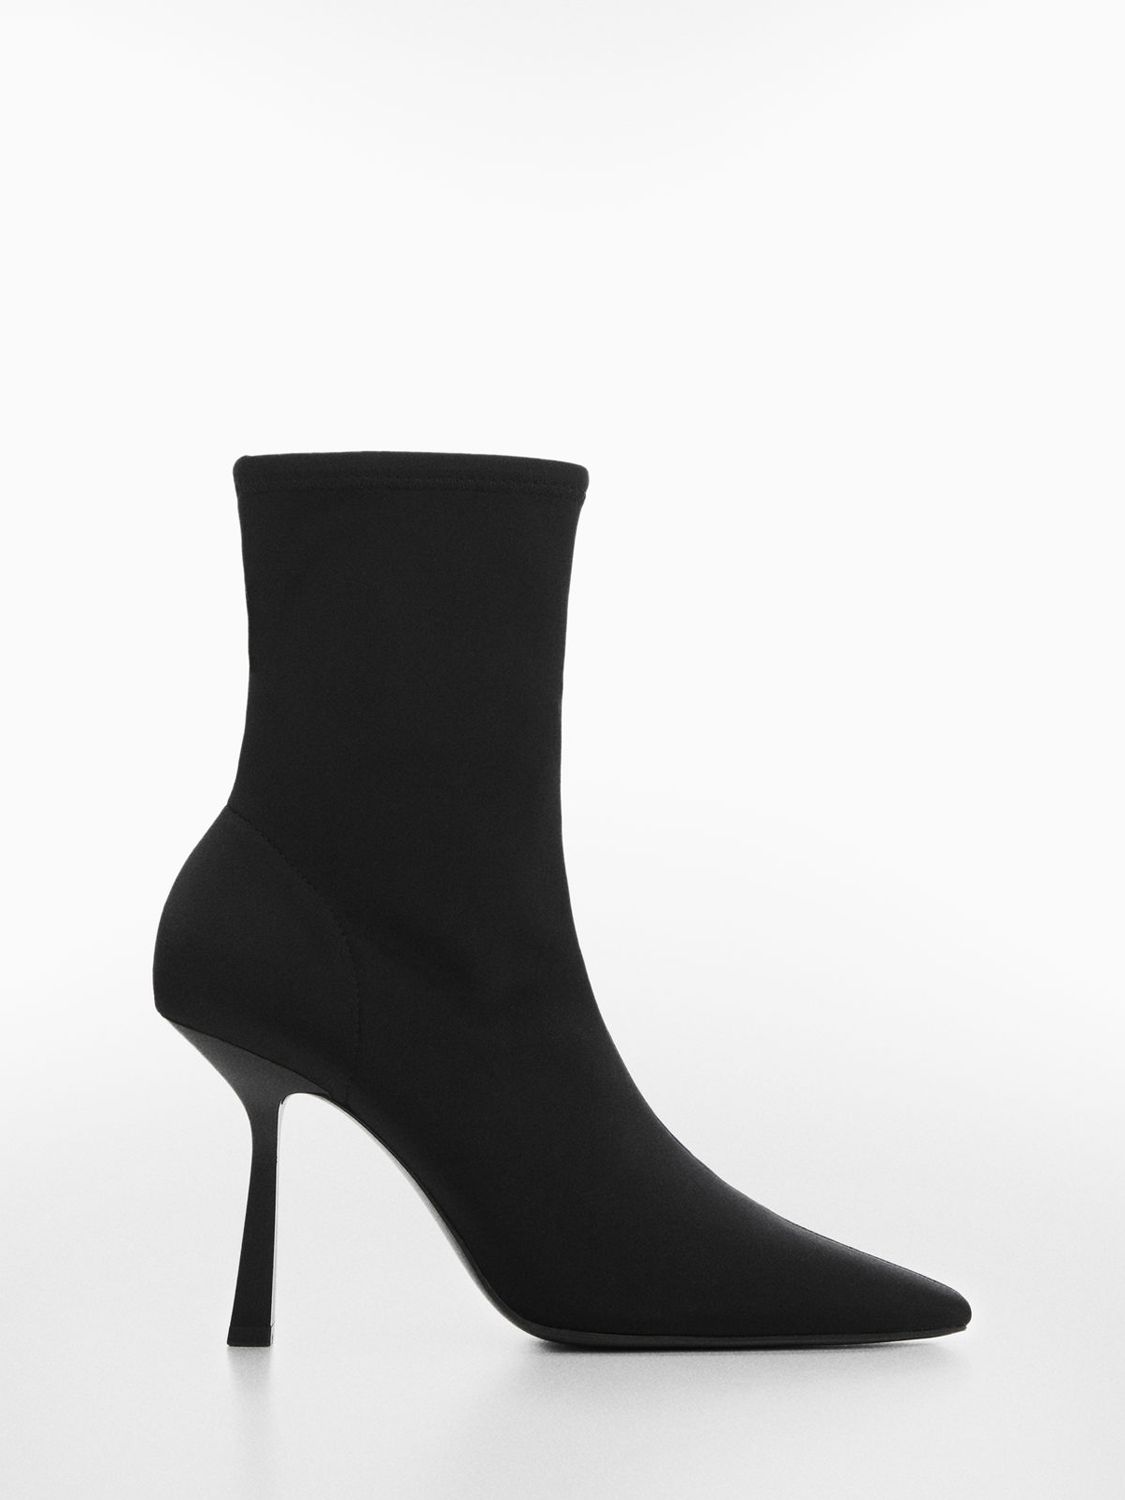 Mango Glo Pointed Heel Ankle Boots, Black